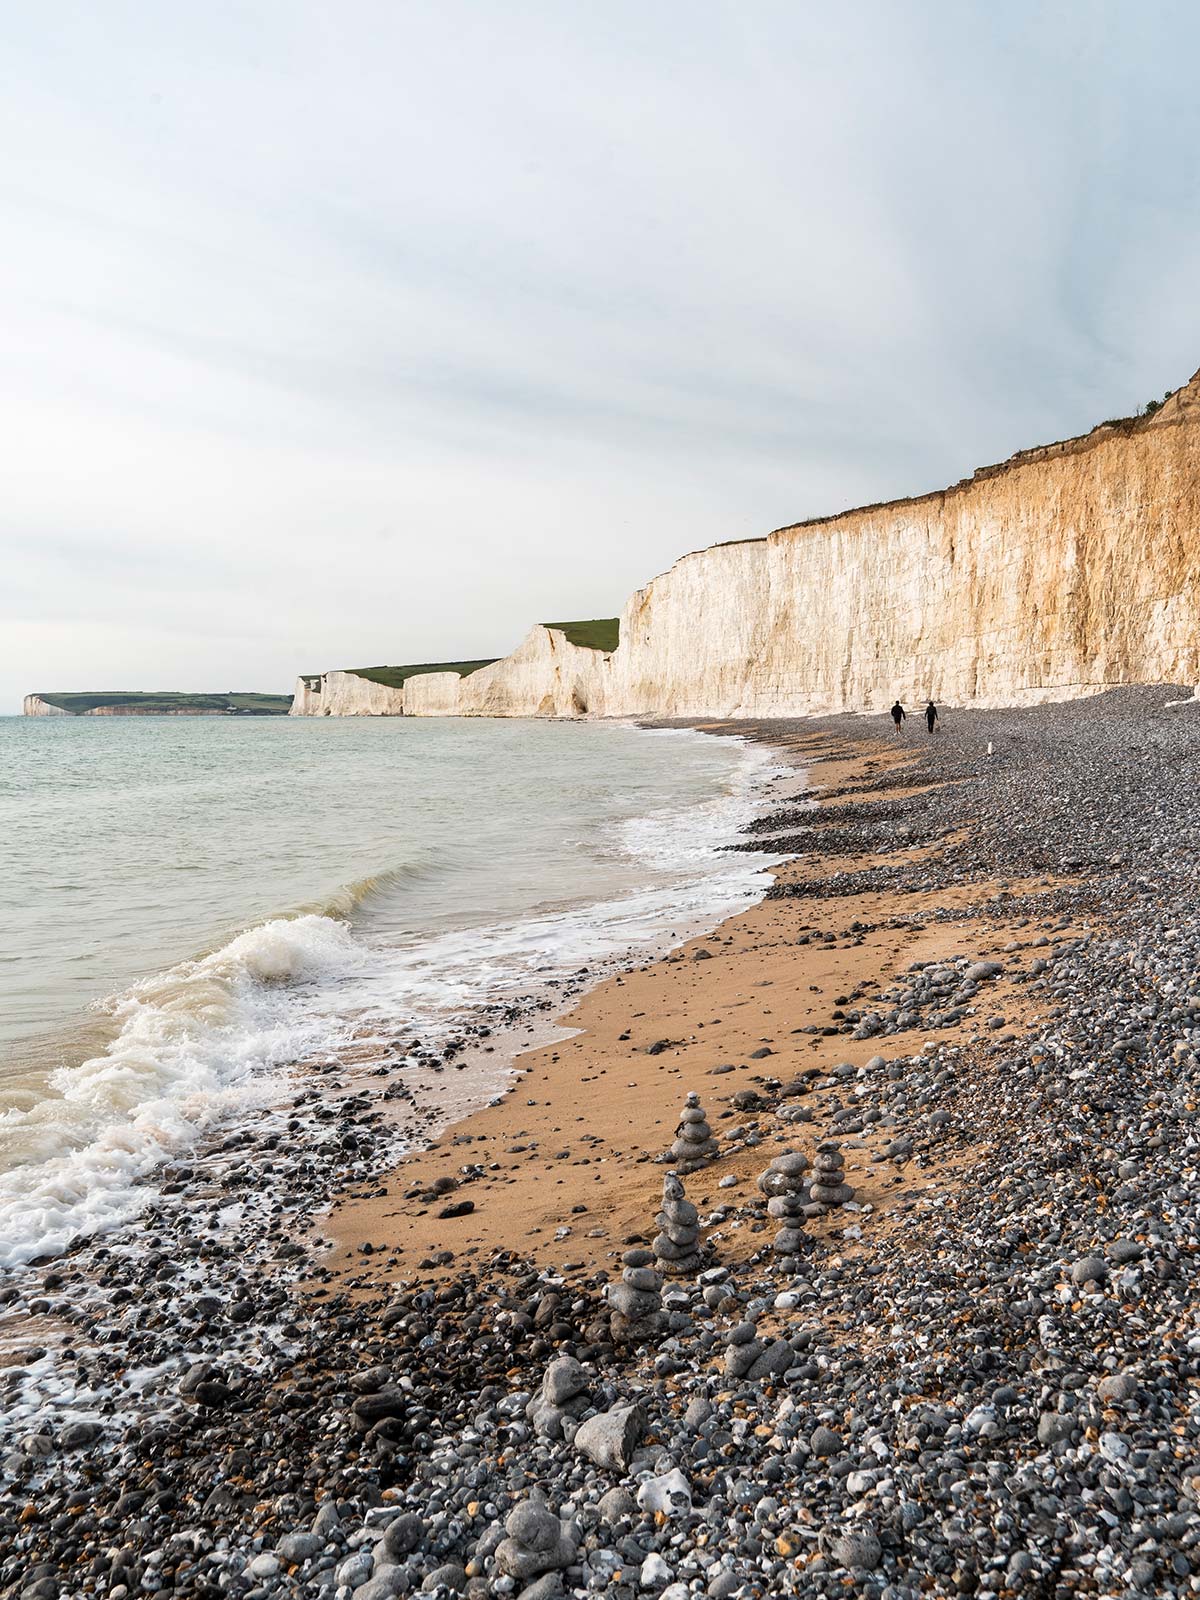 Plage de Birling Gap, Seven Sisters, East Sussex, Angleterre, Royaume-Uni / Birling Gap Beach, Seven Sisters, East Sussex, England, UK